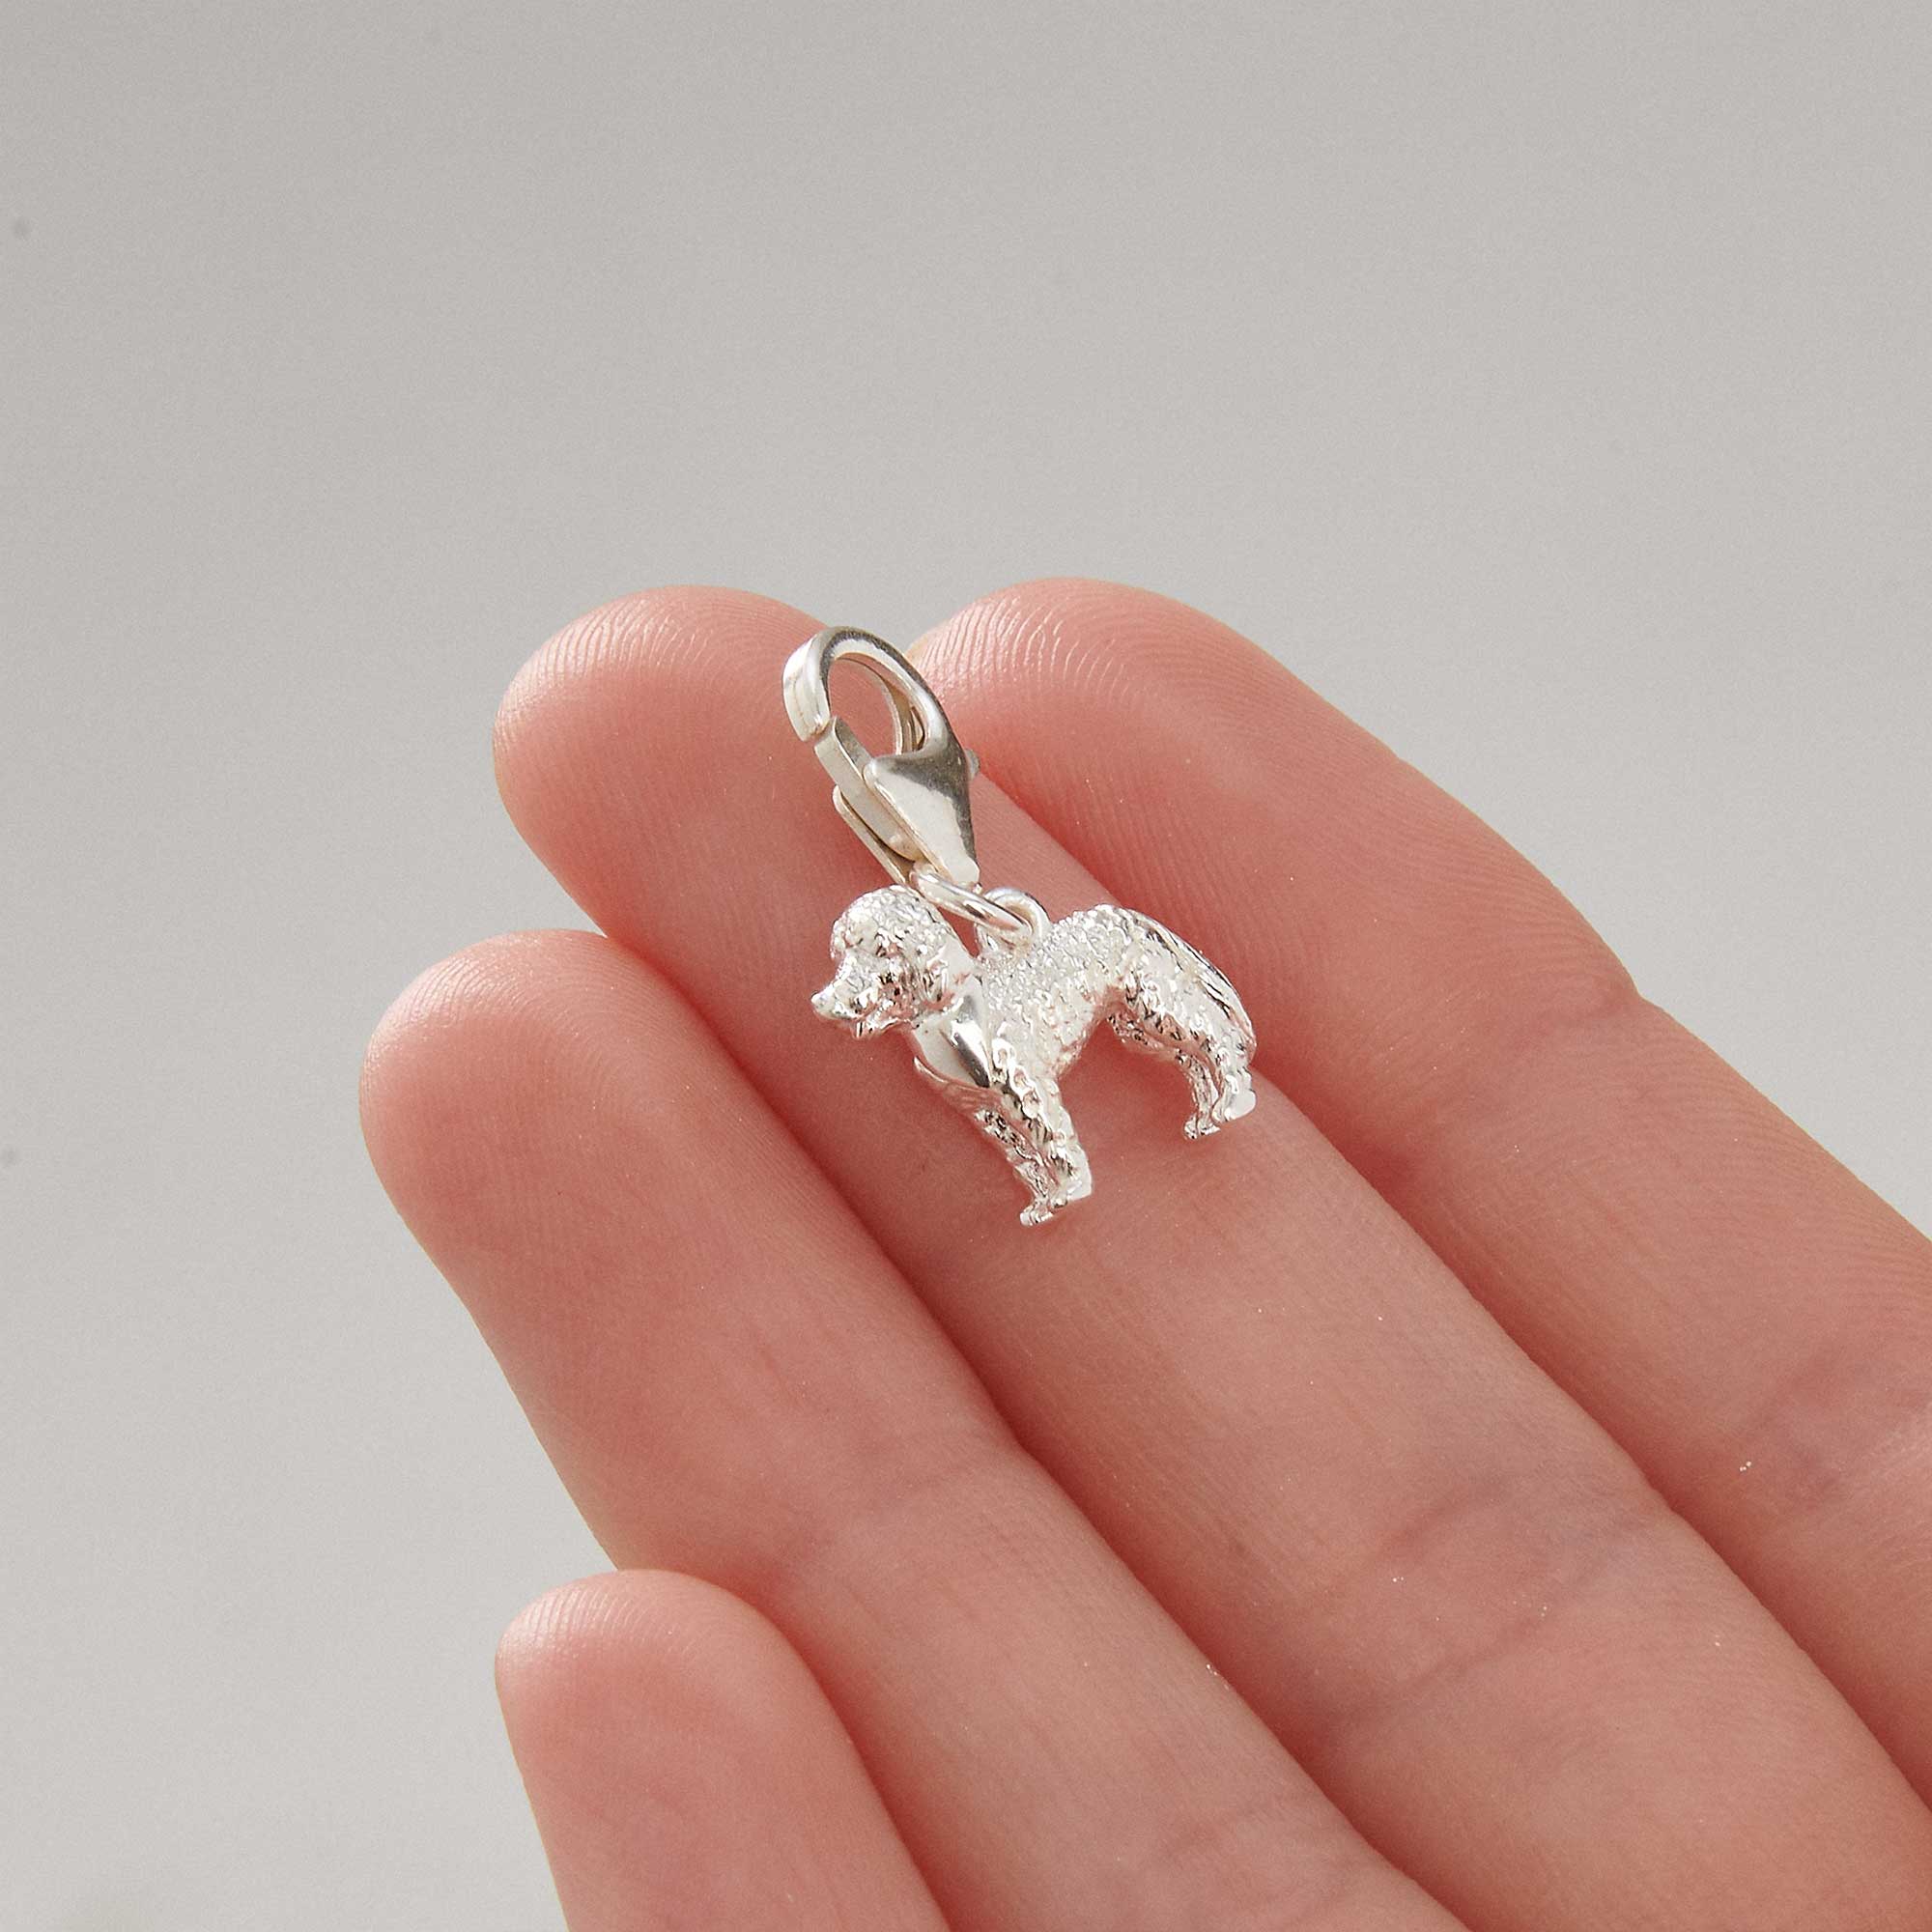 Labradoodle silver dog breed solid sterling silver dog charm with clip on clasp Scarlett Jewellery Ltd